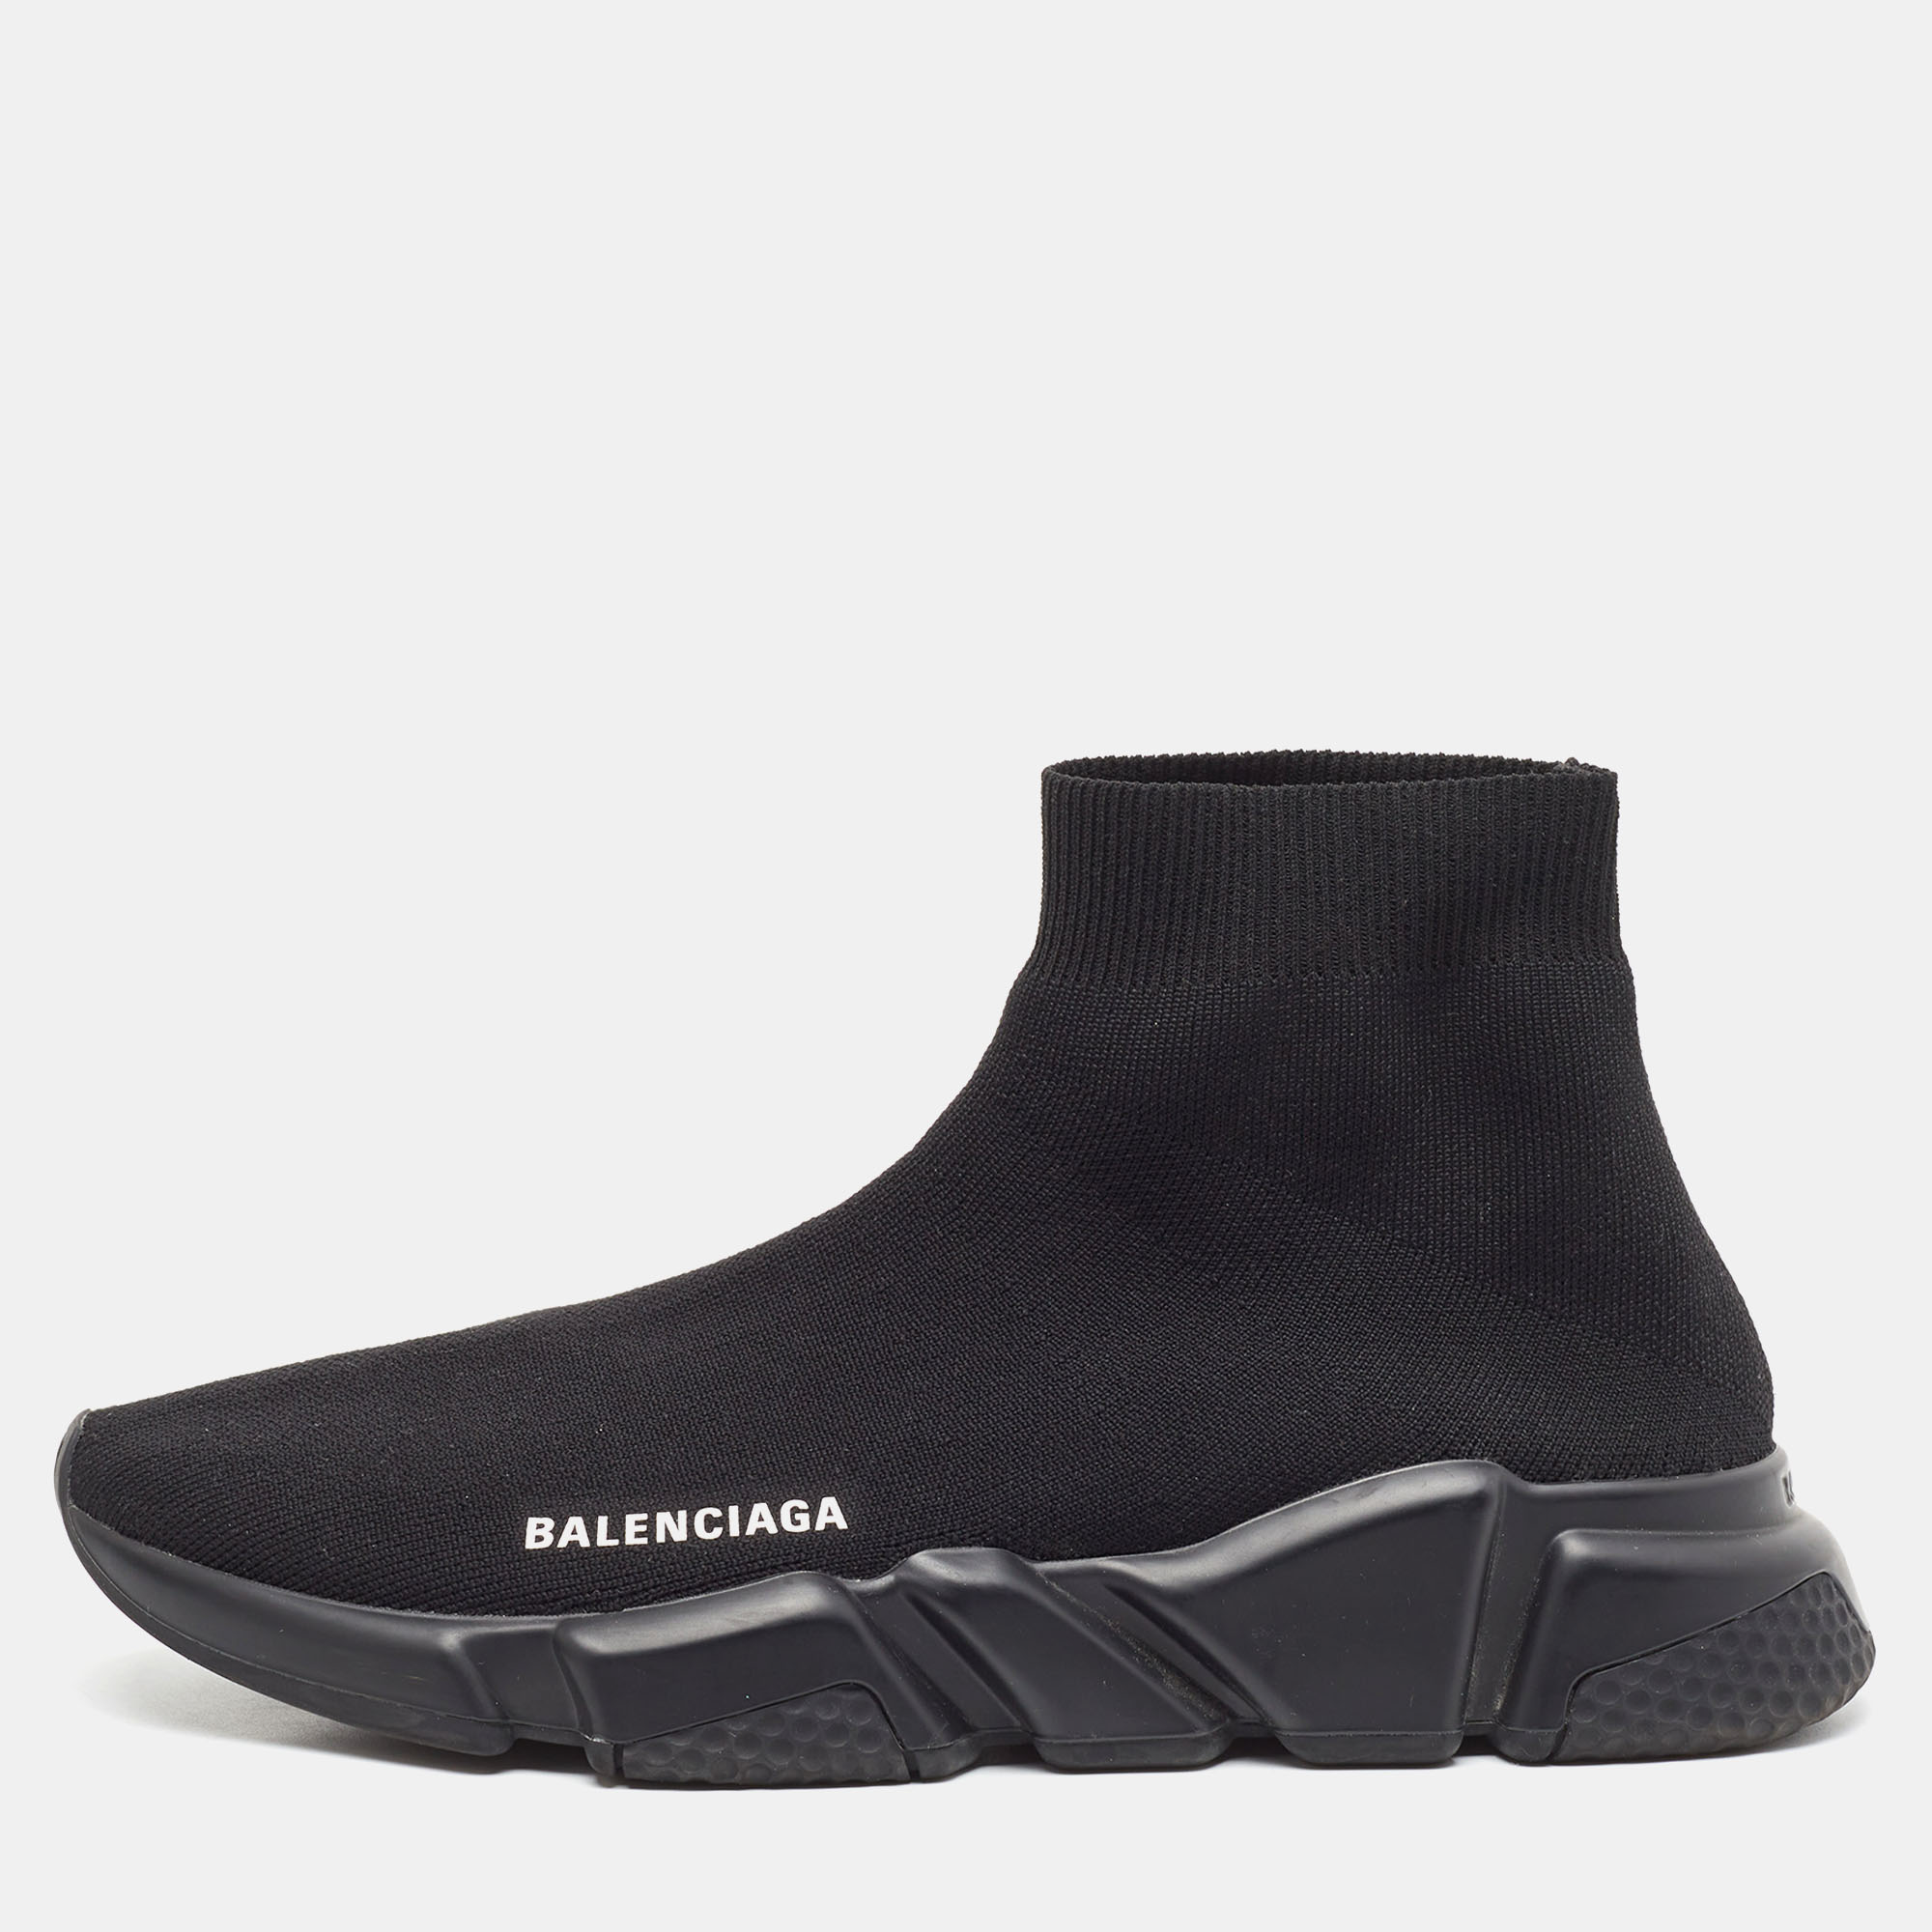 Pre-owned Balenciaga Black Knit Fabric Speed Trainer Sneakers Size 41